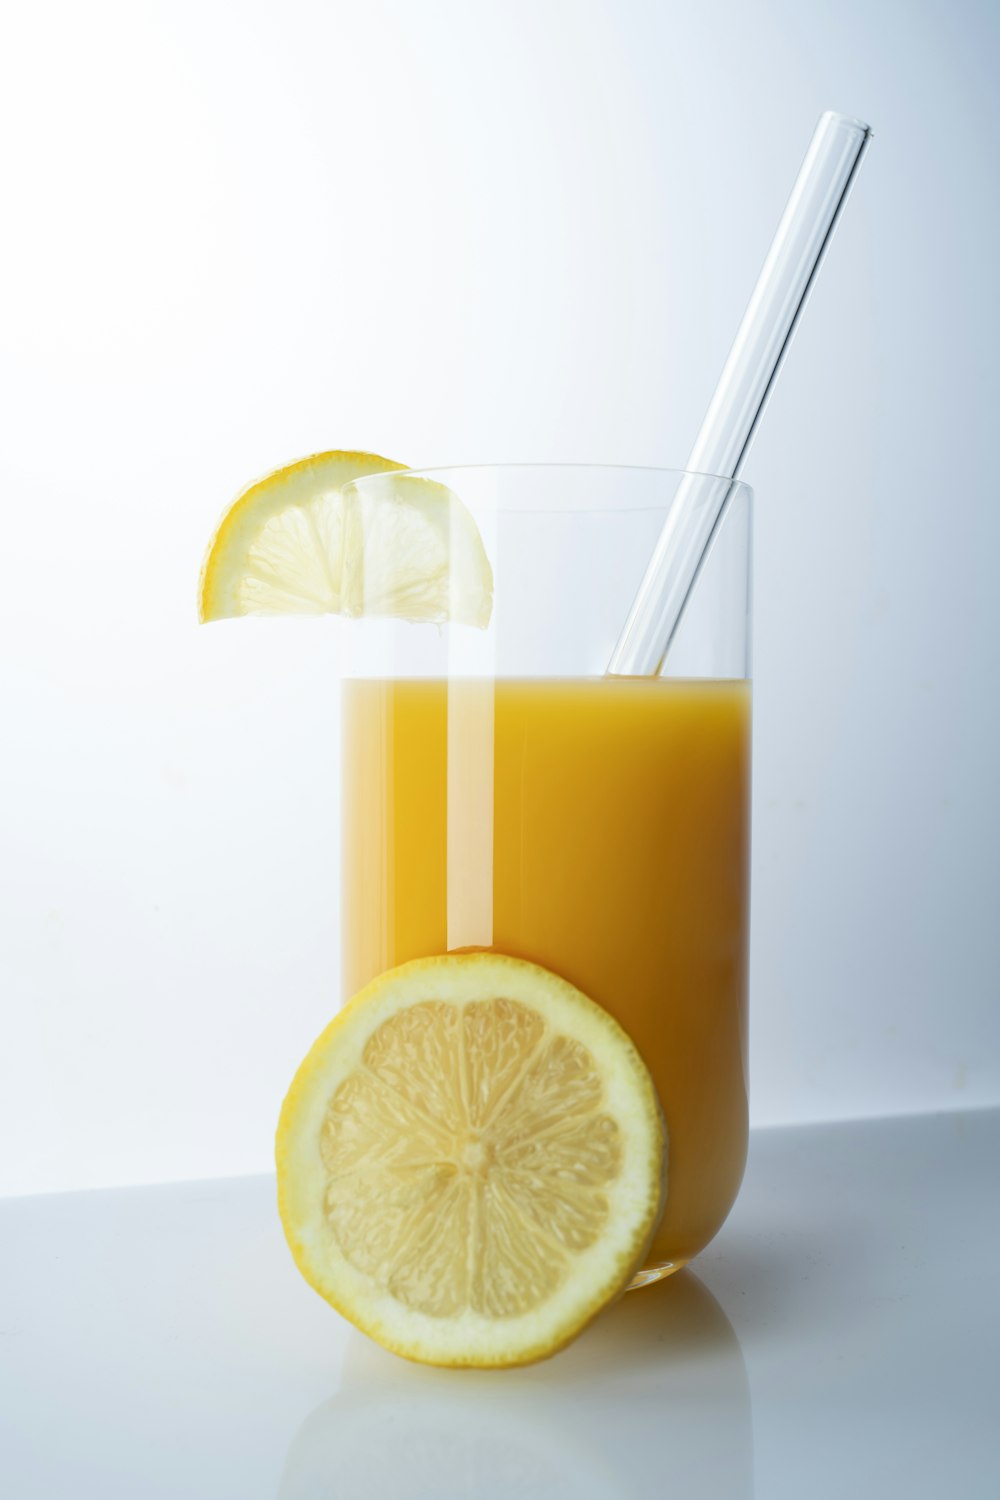 Juice Cup Photos and Images